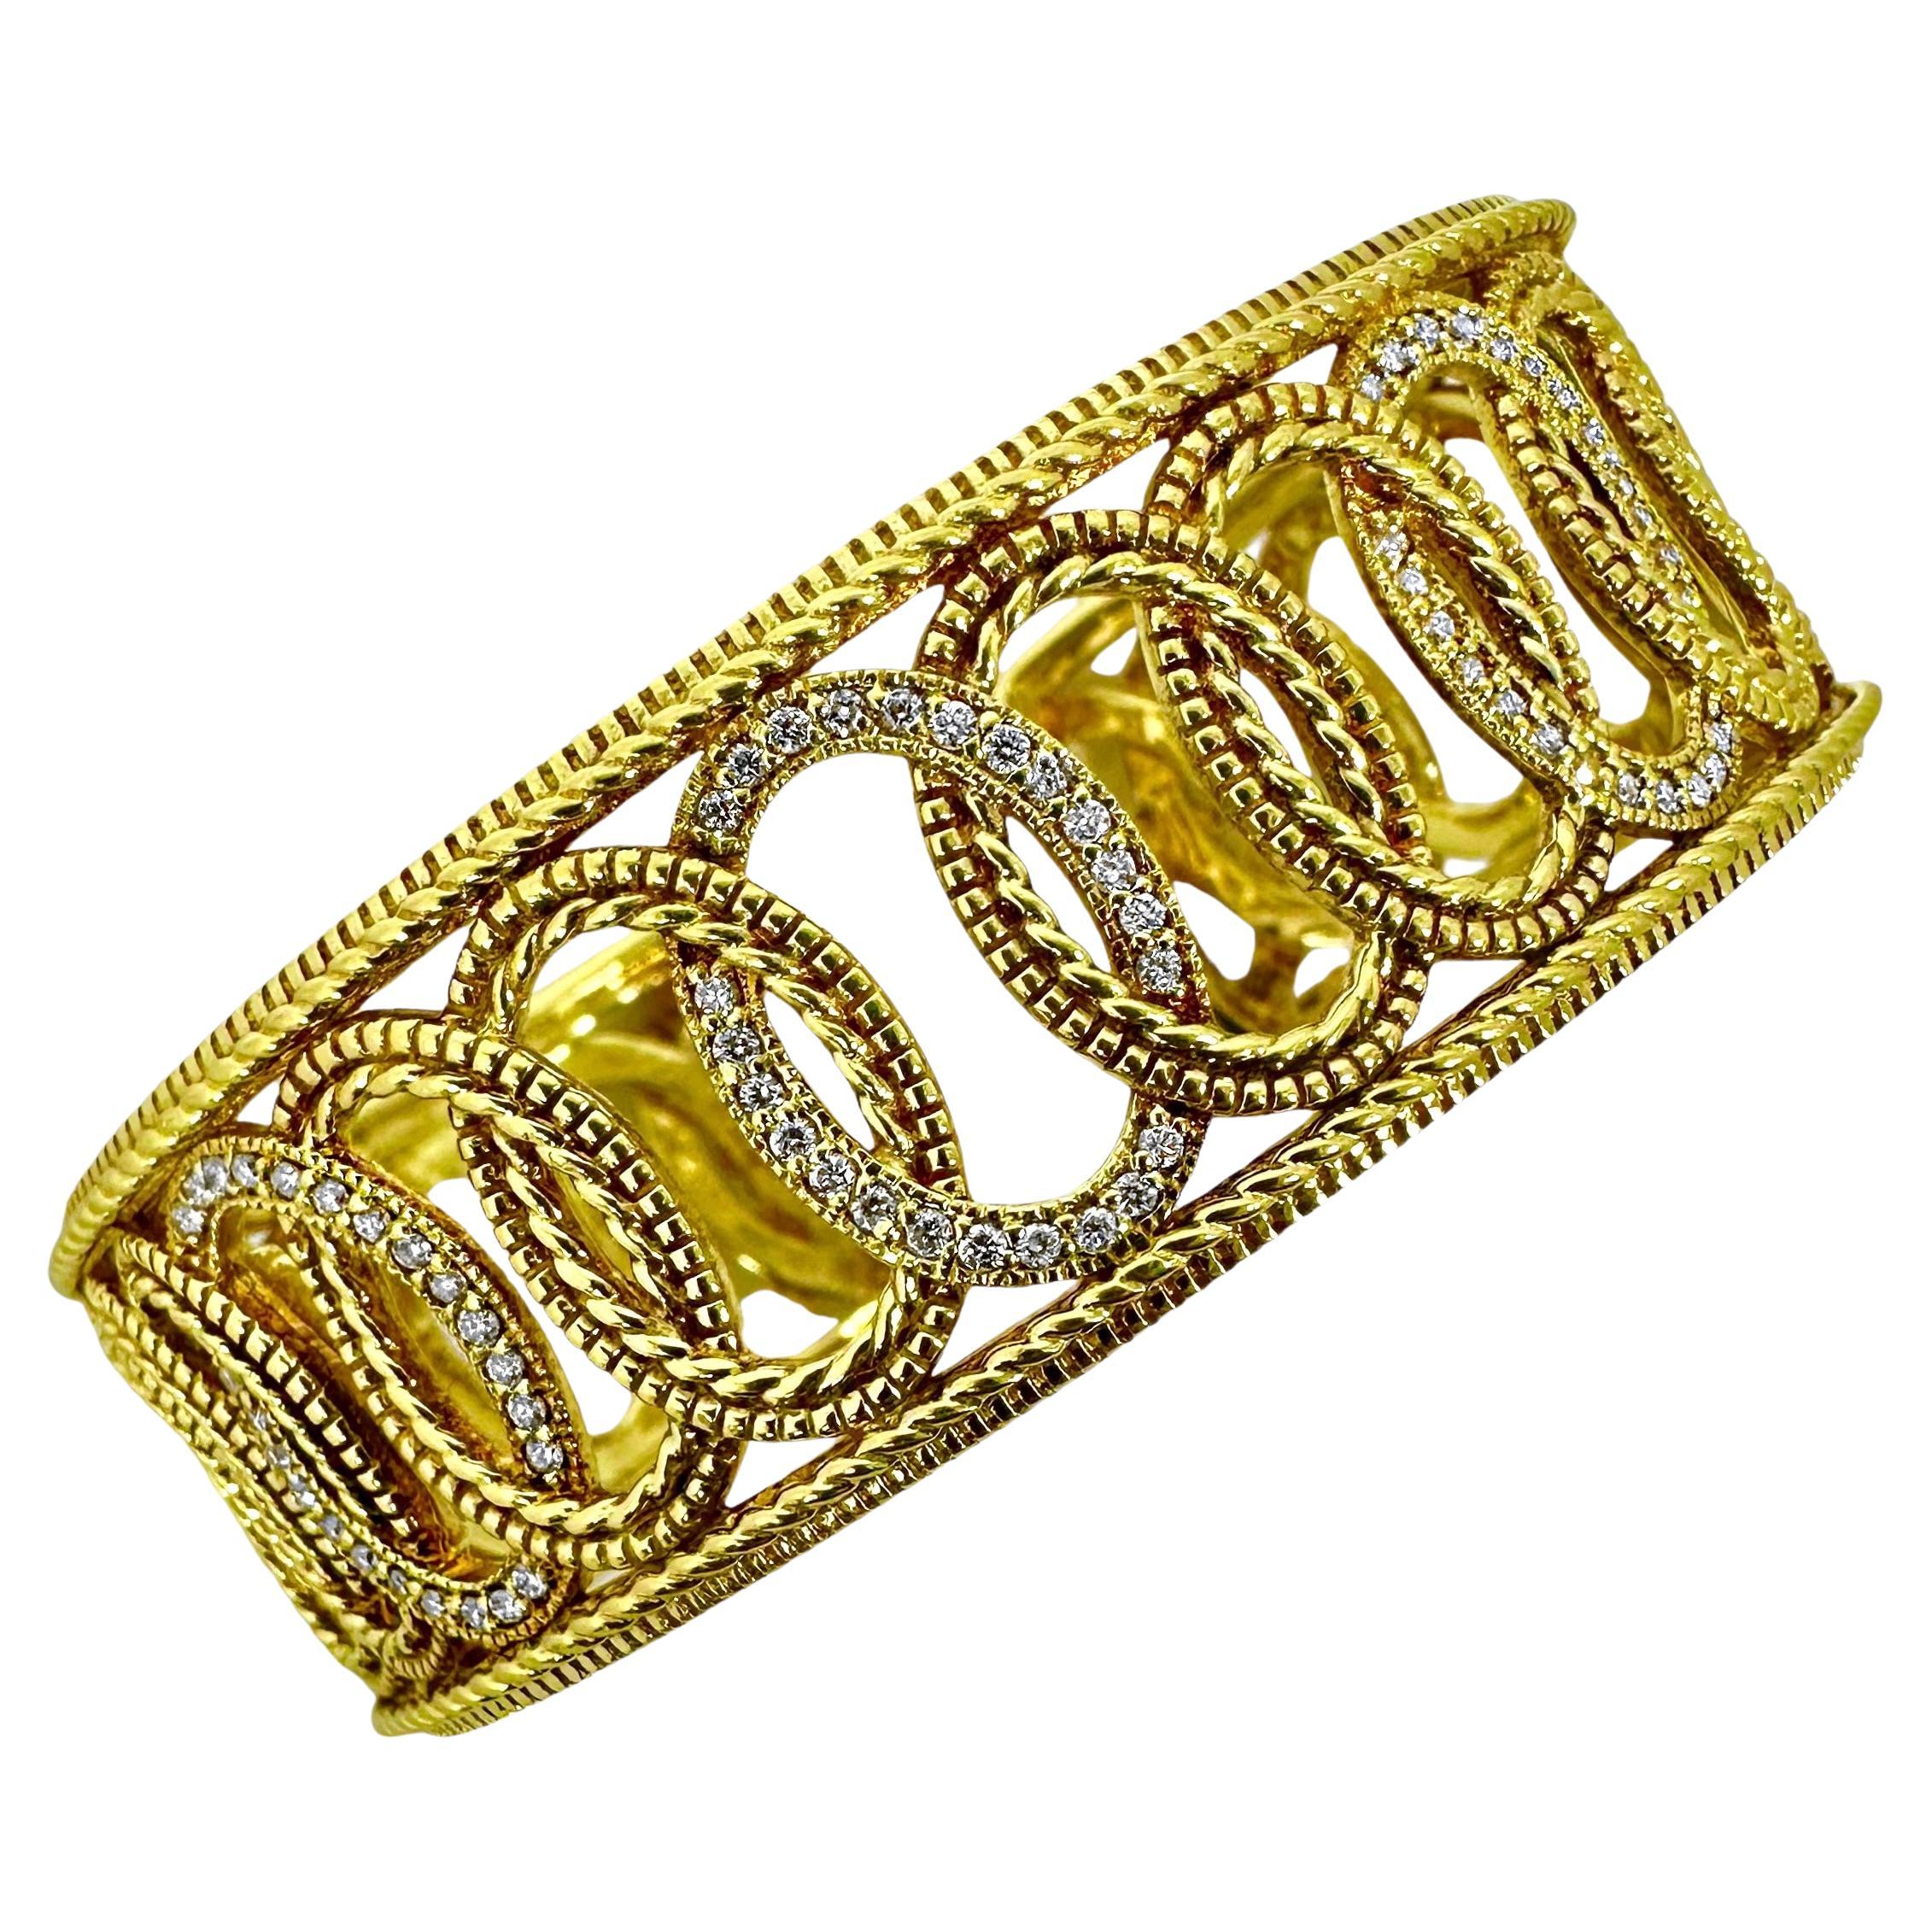 Casual Judith Ripka 18k Gold Hinged, Cuff Bracelet with Diamonds 7/8 inch Wide 